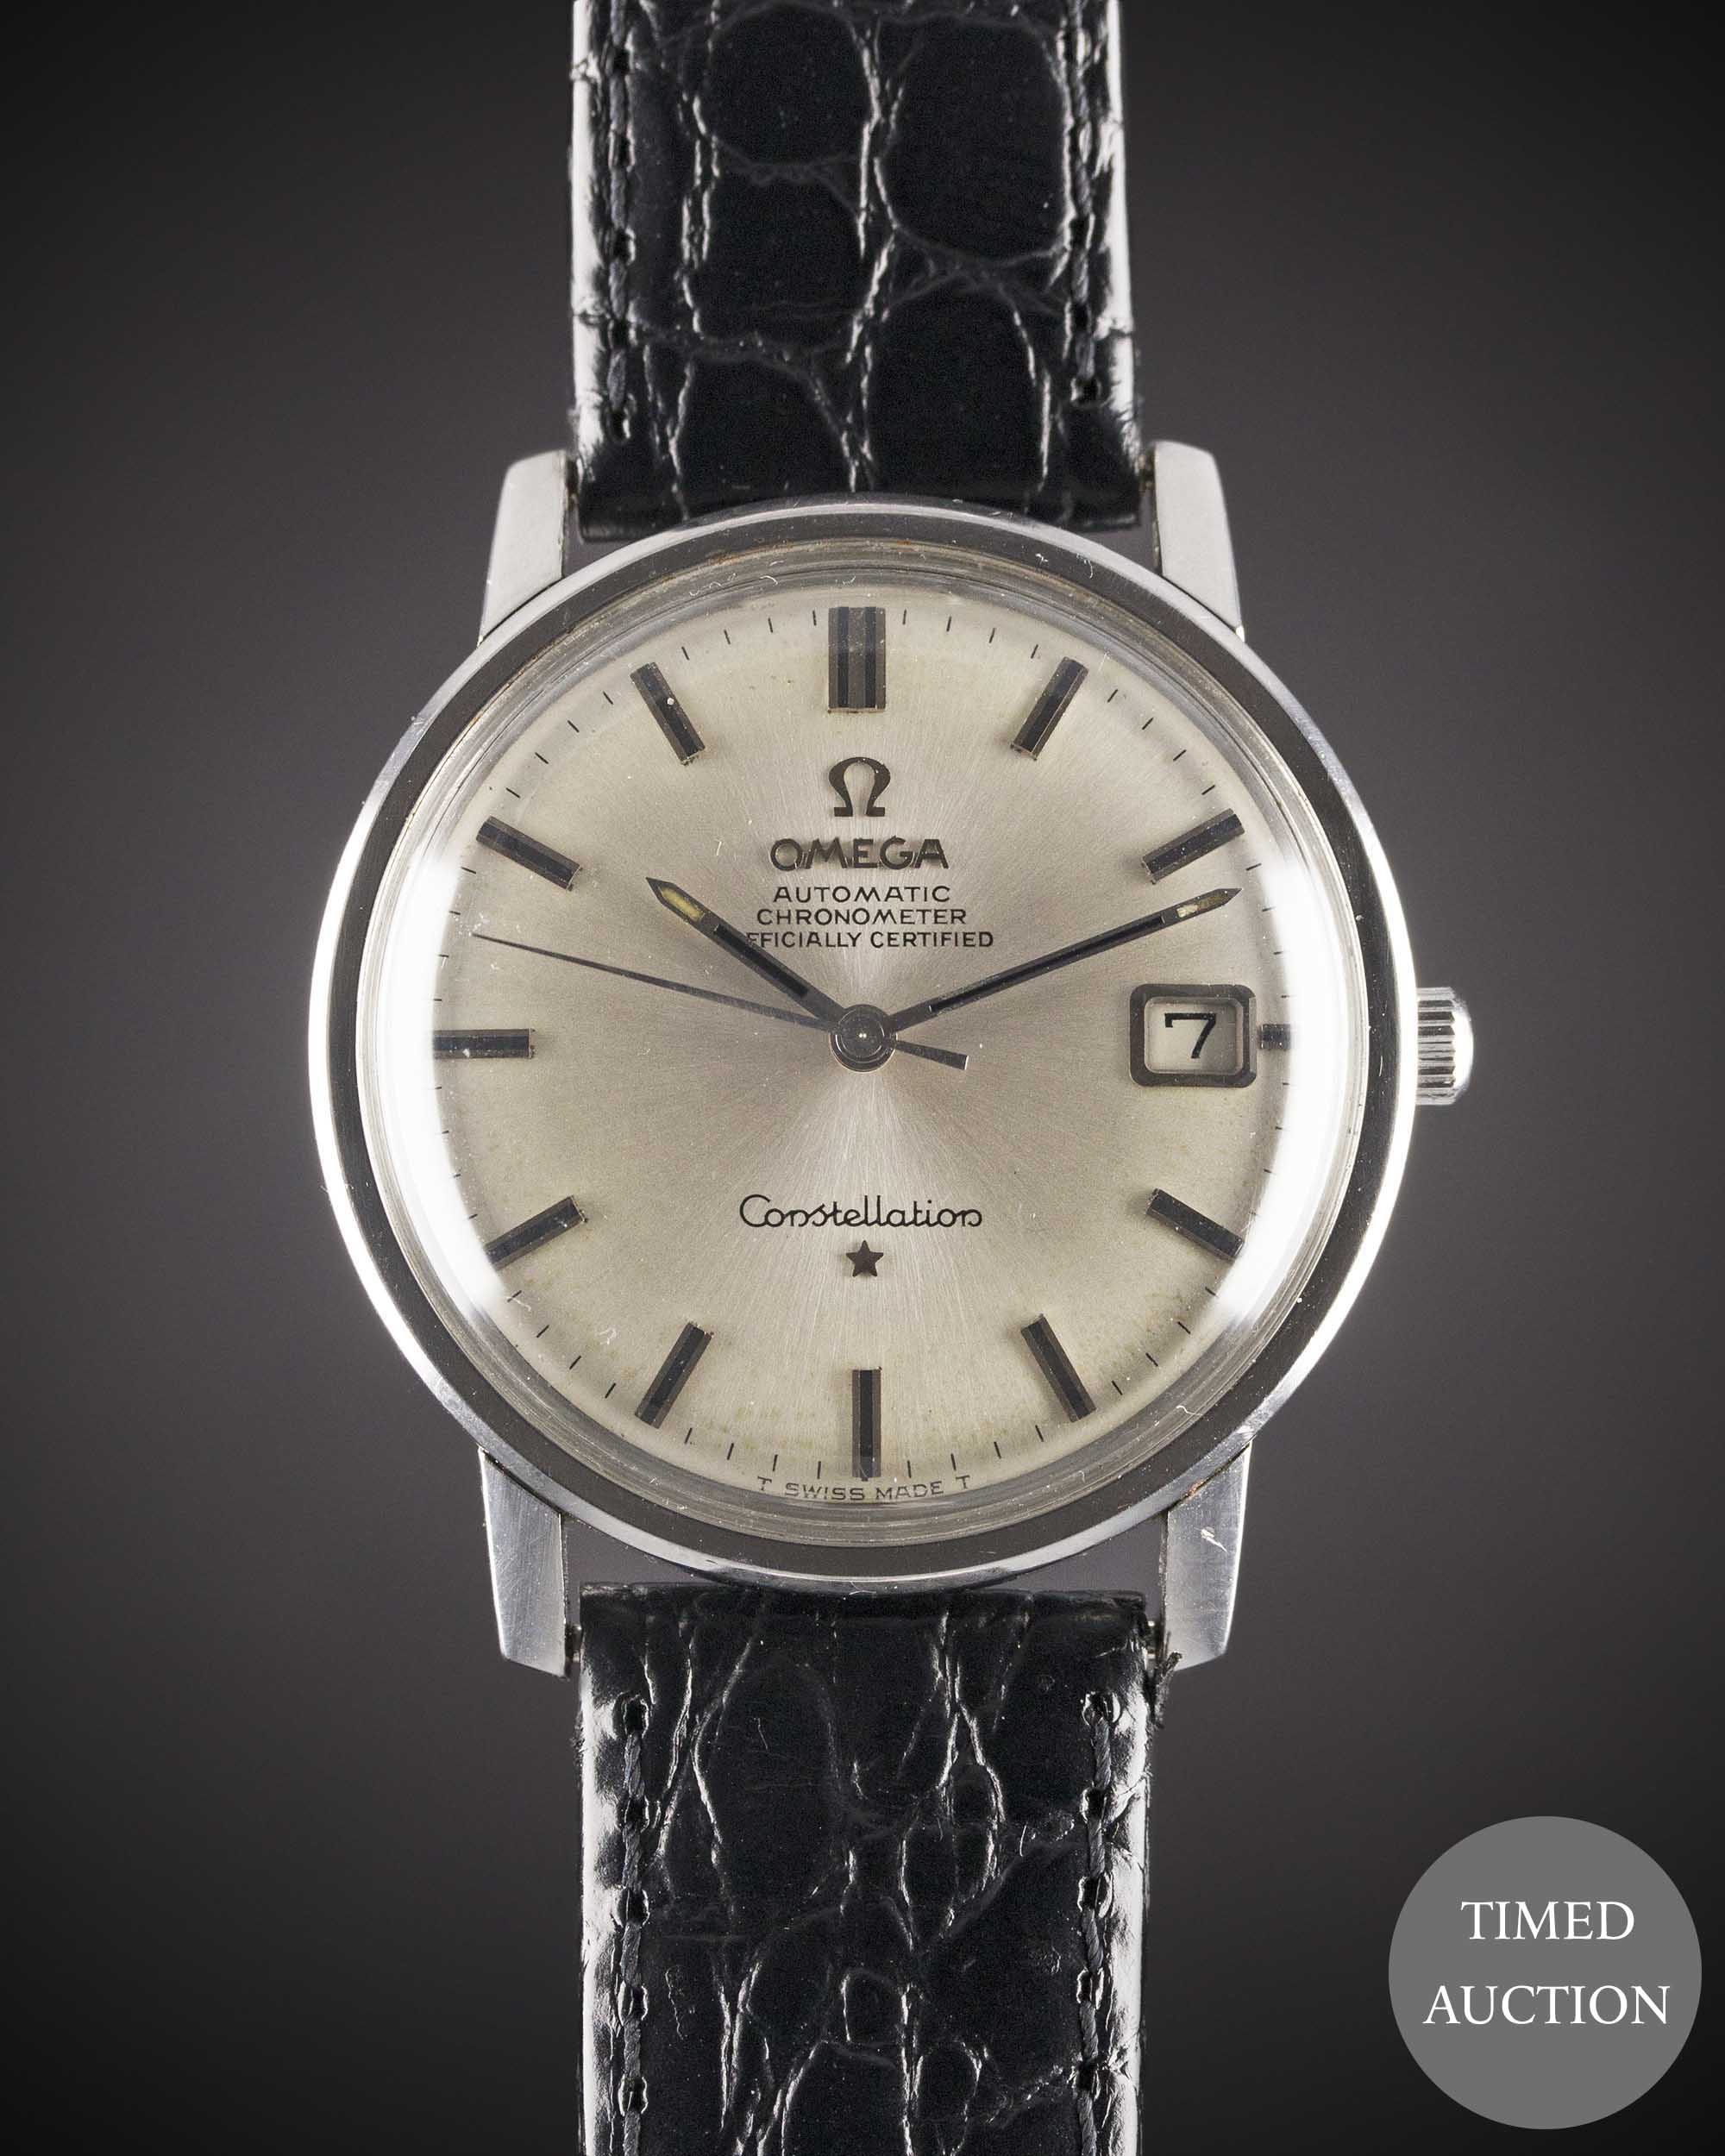 A GENTLEMAN'S STAINLESS STEEL OMEGA CONSTELLATION AUTOMATIC CHRONOMETER WRIST WATCH CIRCA 1967, REF.